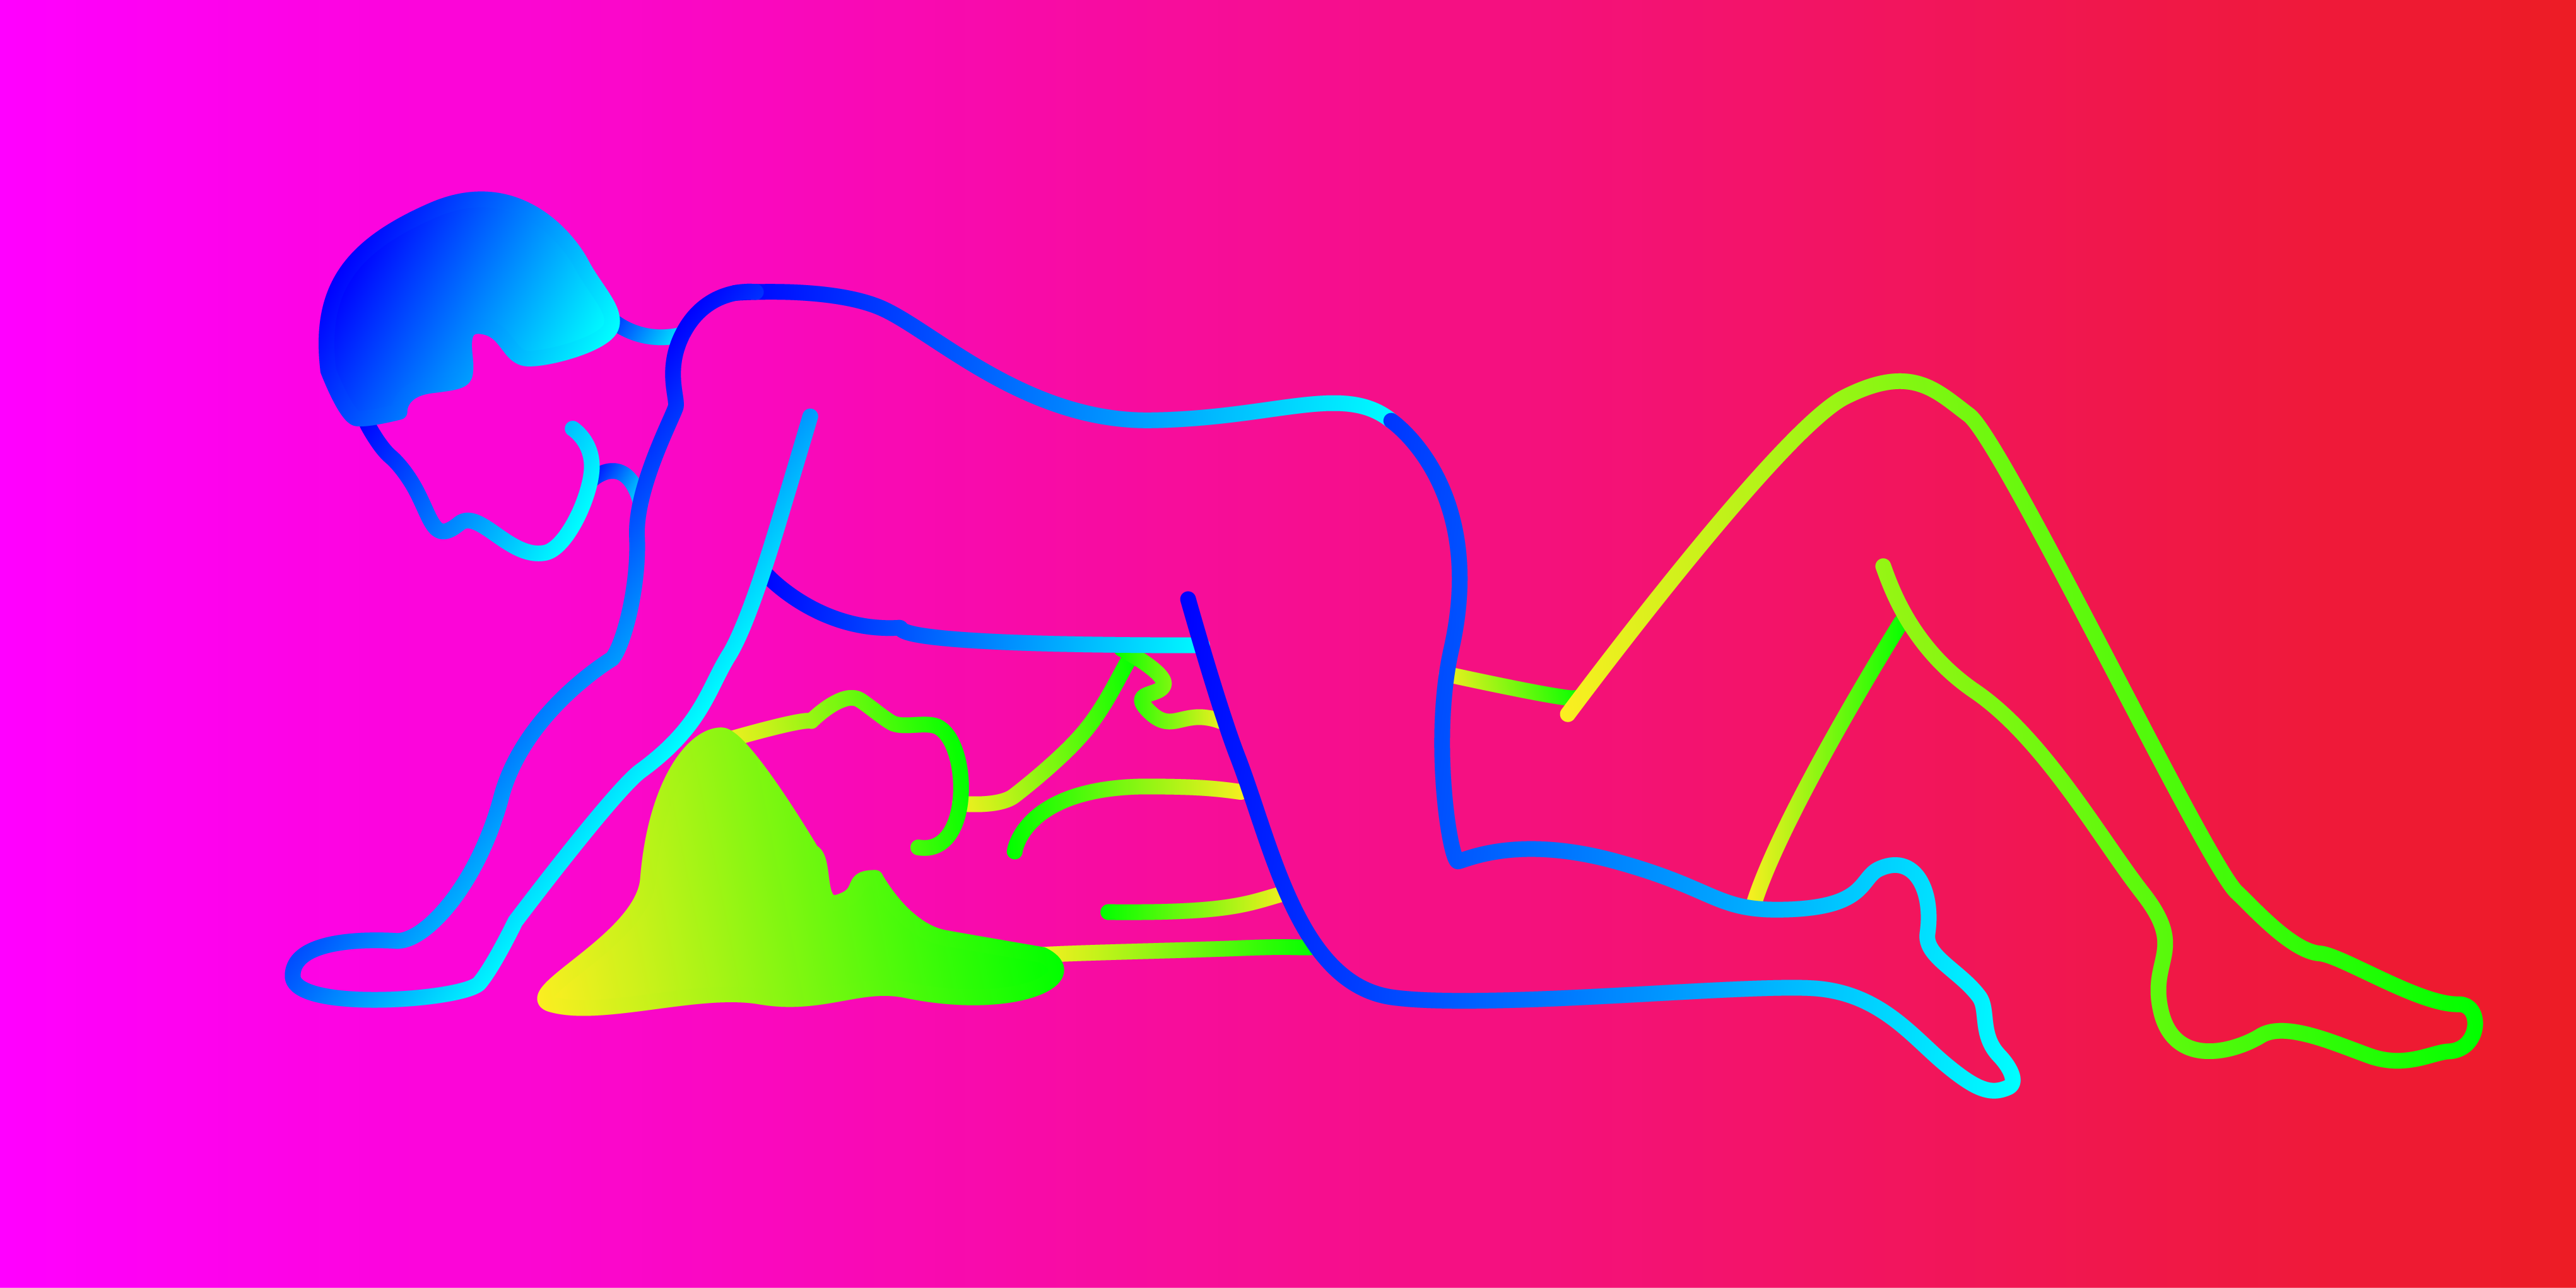 An illustration of the april fool's paradise sex position